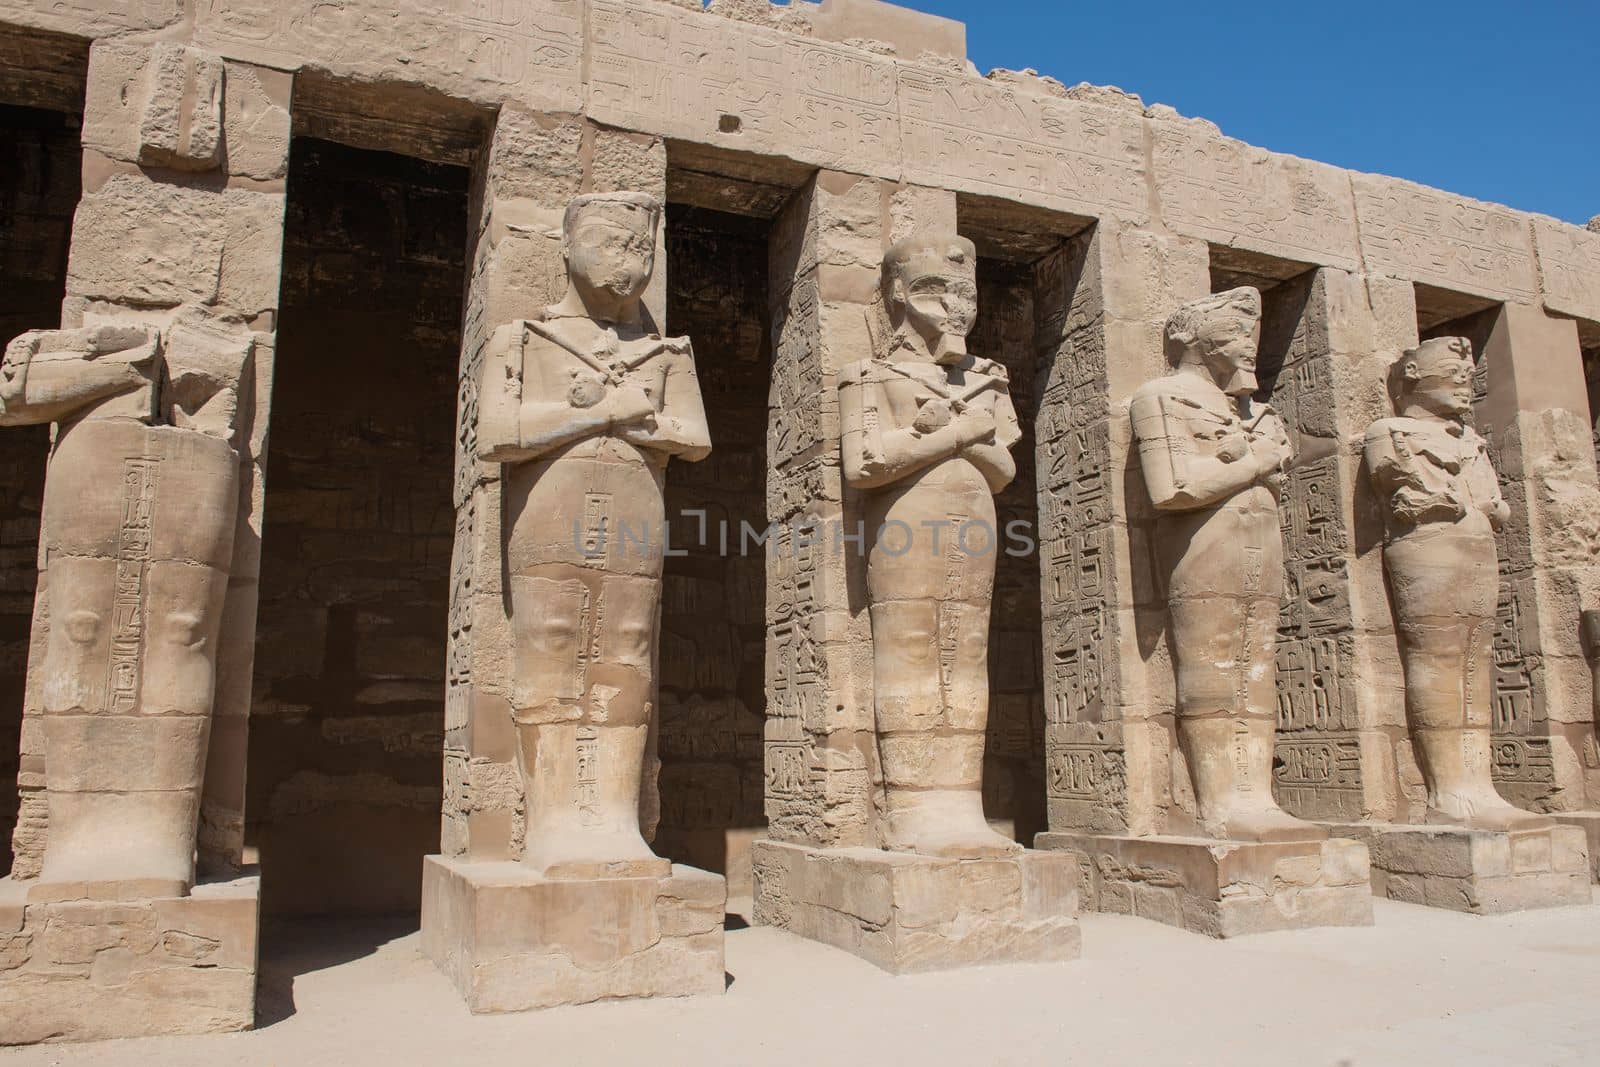 Large statues of Ramses III in ancient egyptian Karnak Temple with columns in courtyard area